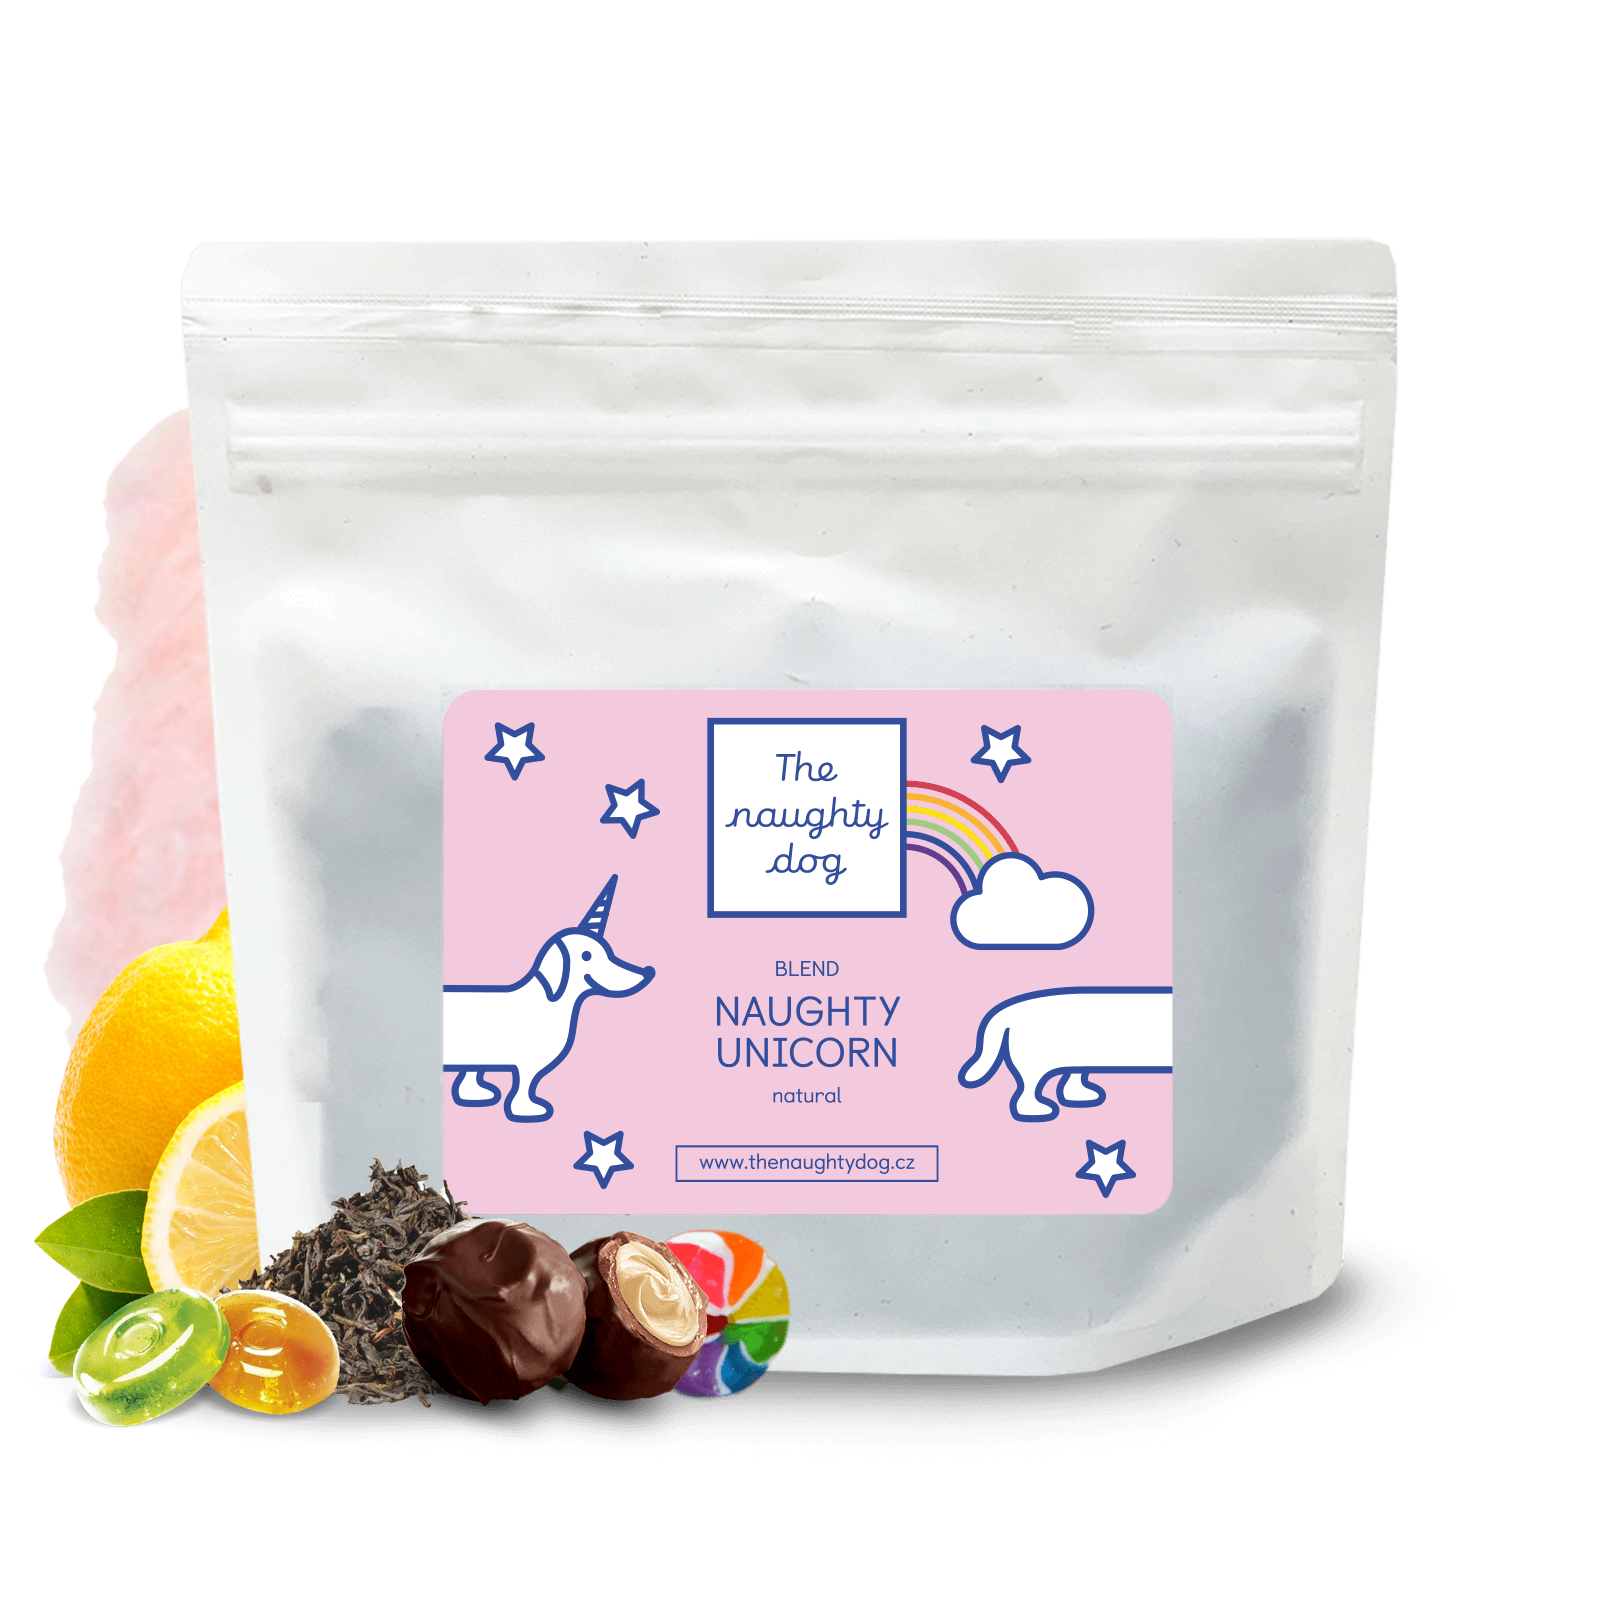 Specialty coffee The naughty dog UNICORN BLEND #4